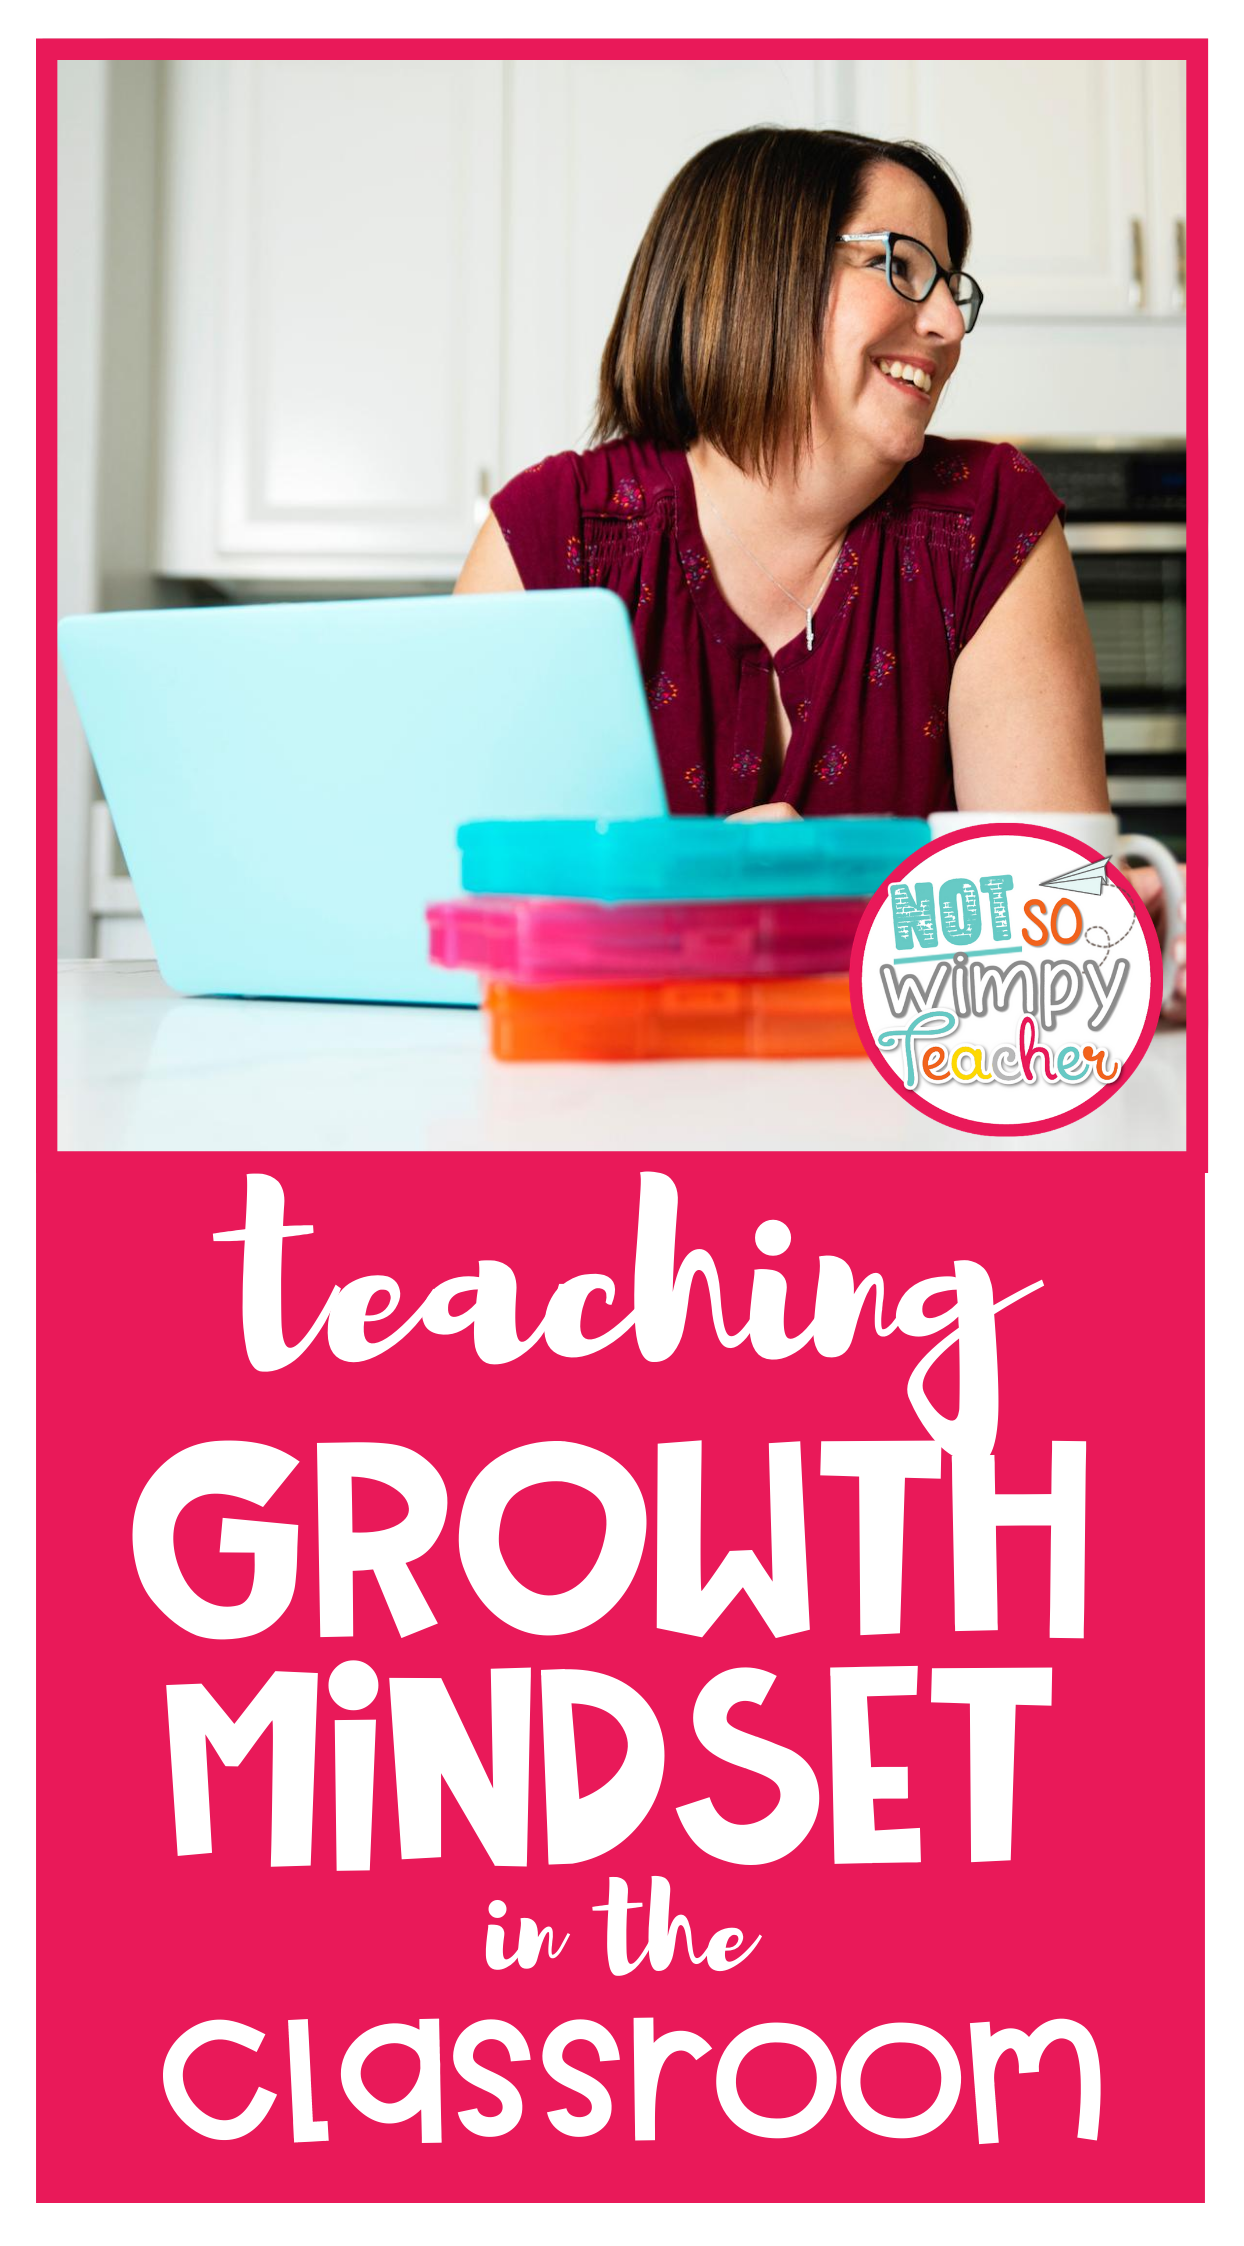 smiling teacher with text overlay teaching growth mindset in the classroom